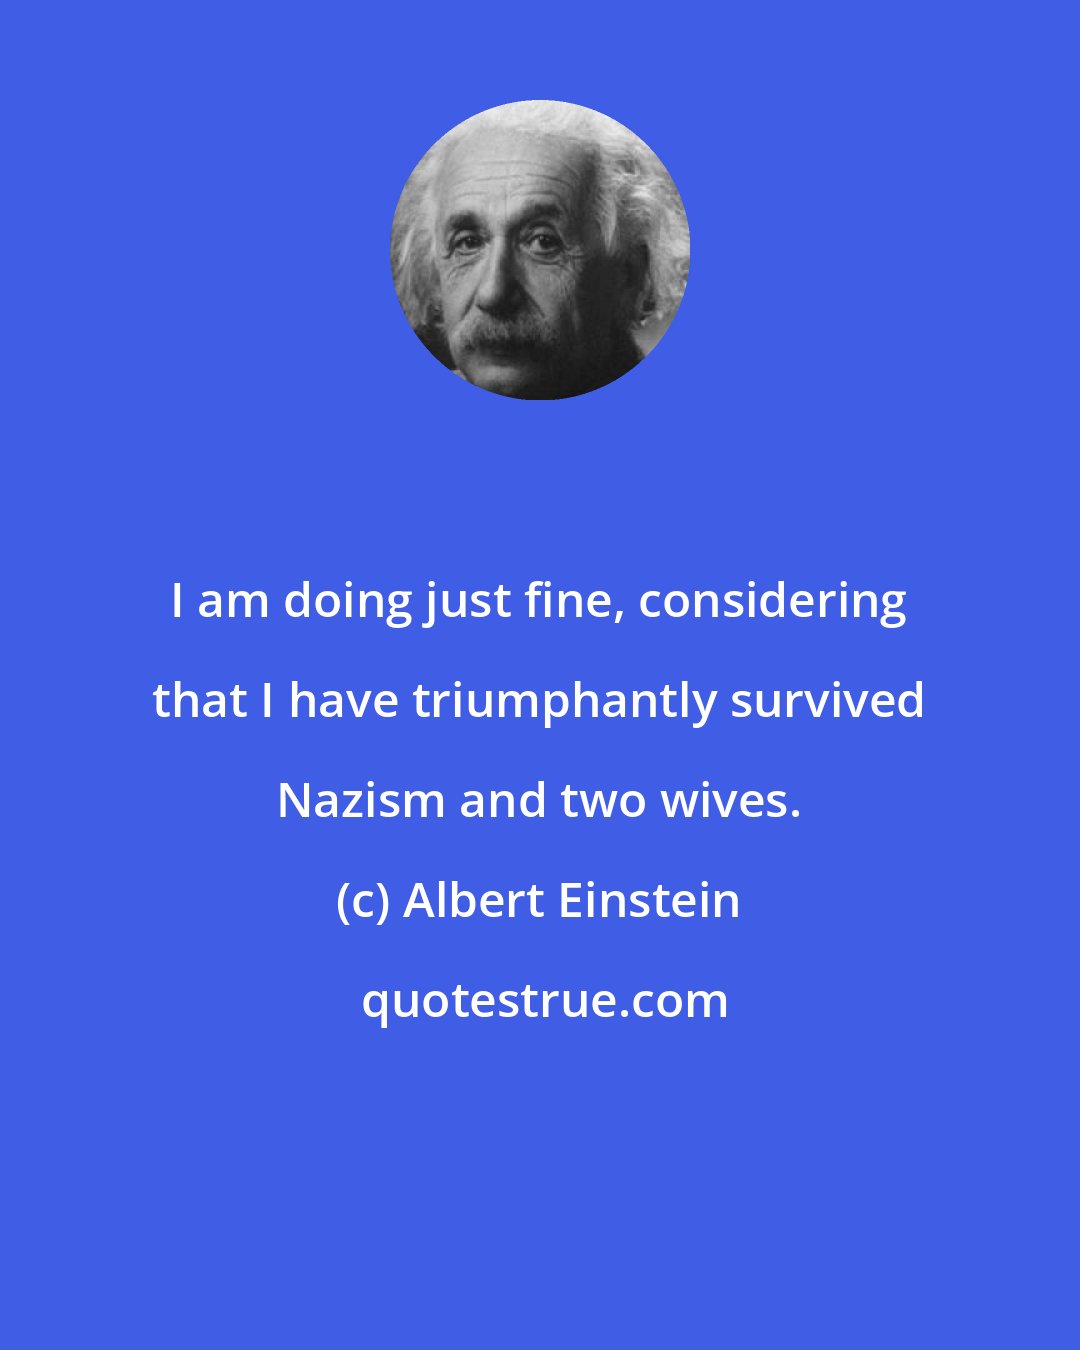 Albert Einstein: I am doing just fine, considering that I have triumphantly survived Nazism and two wives.